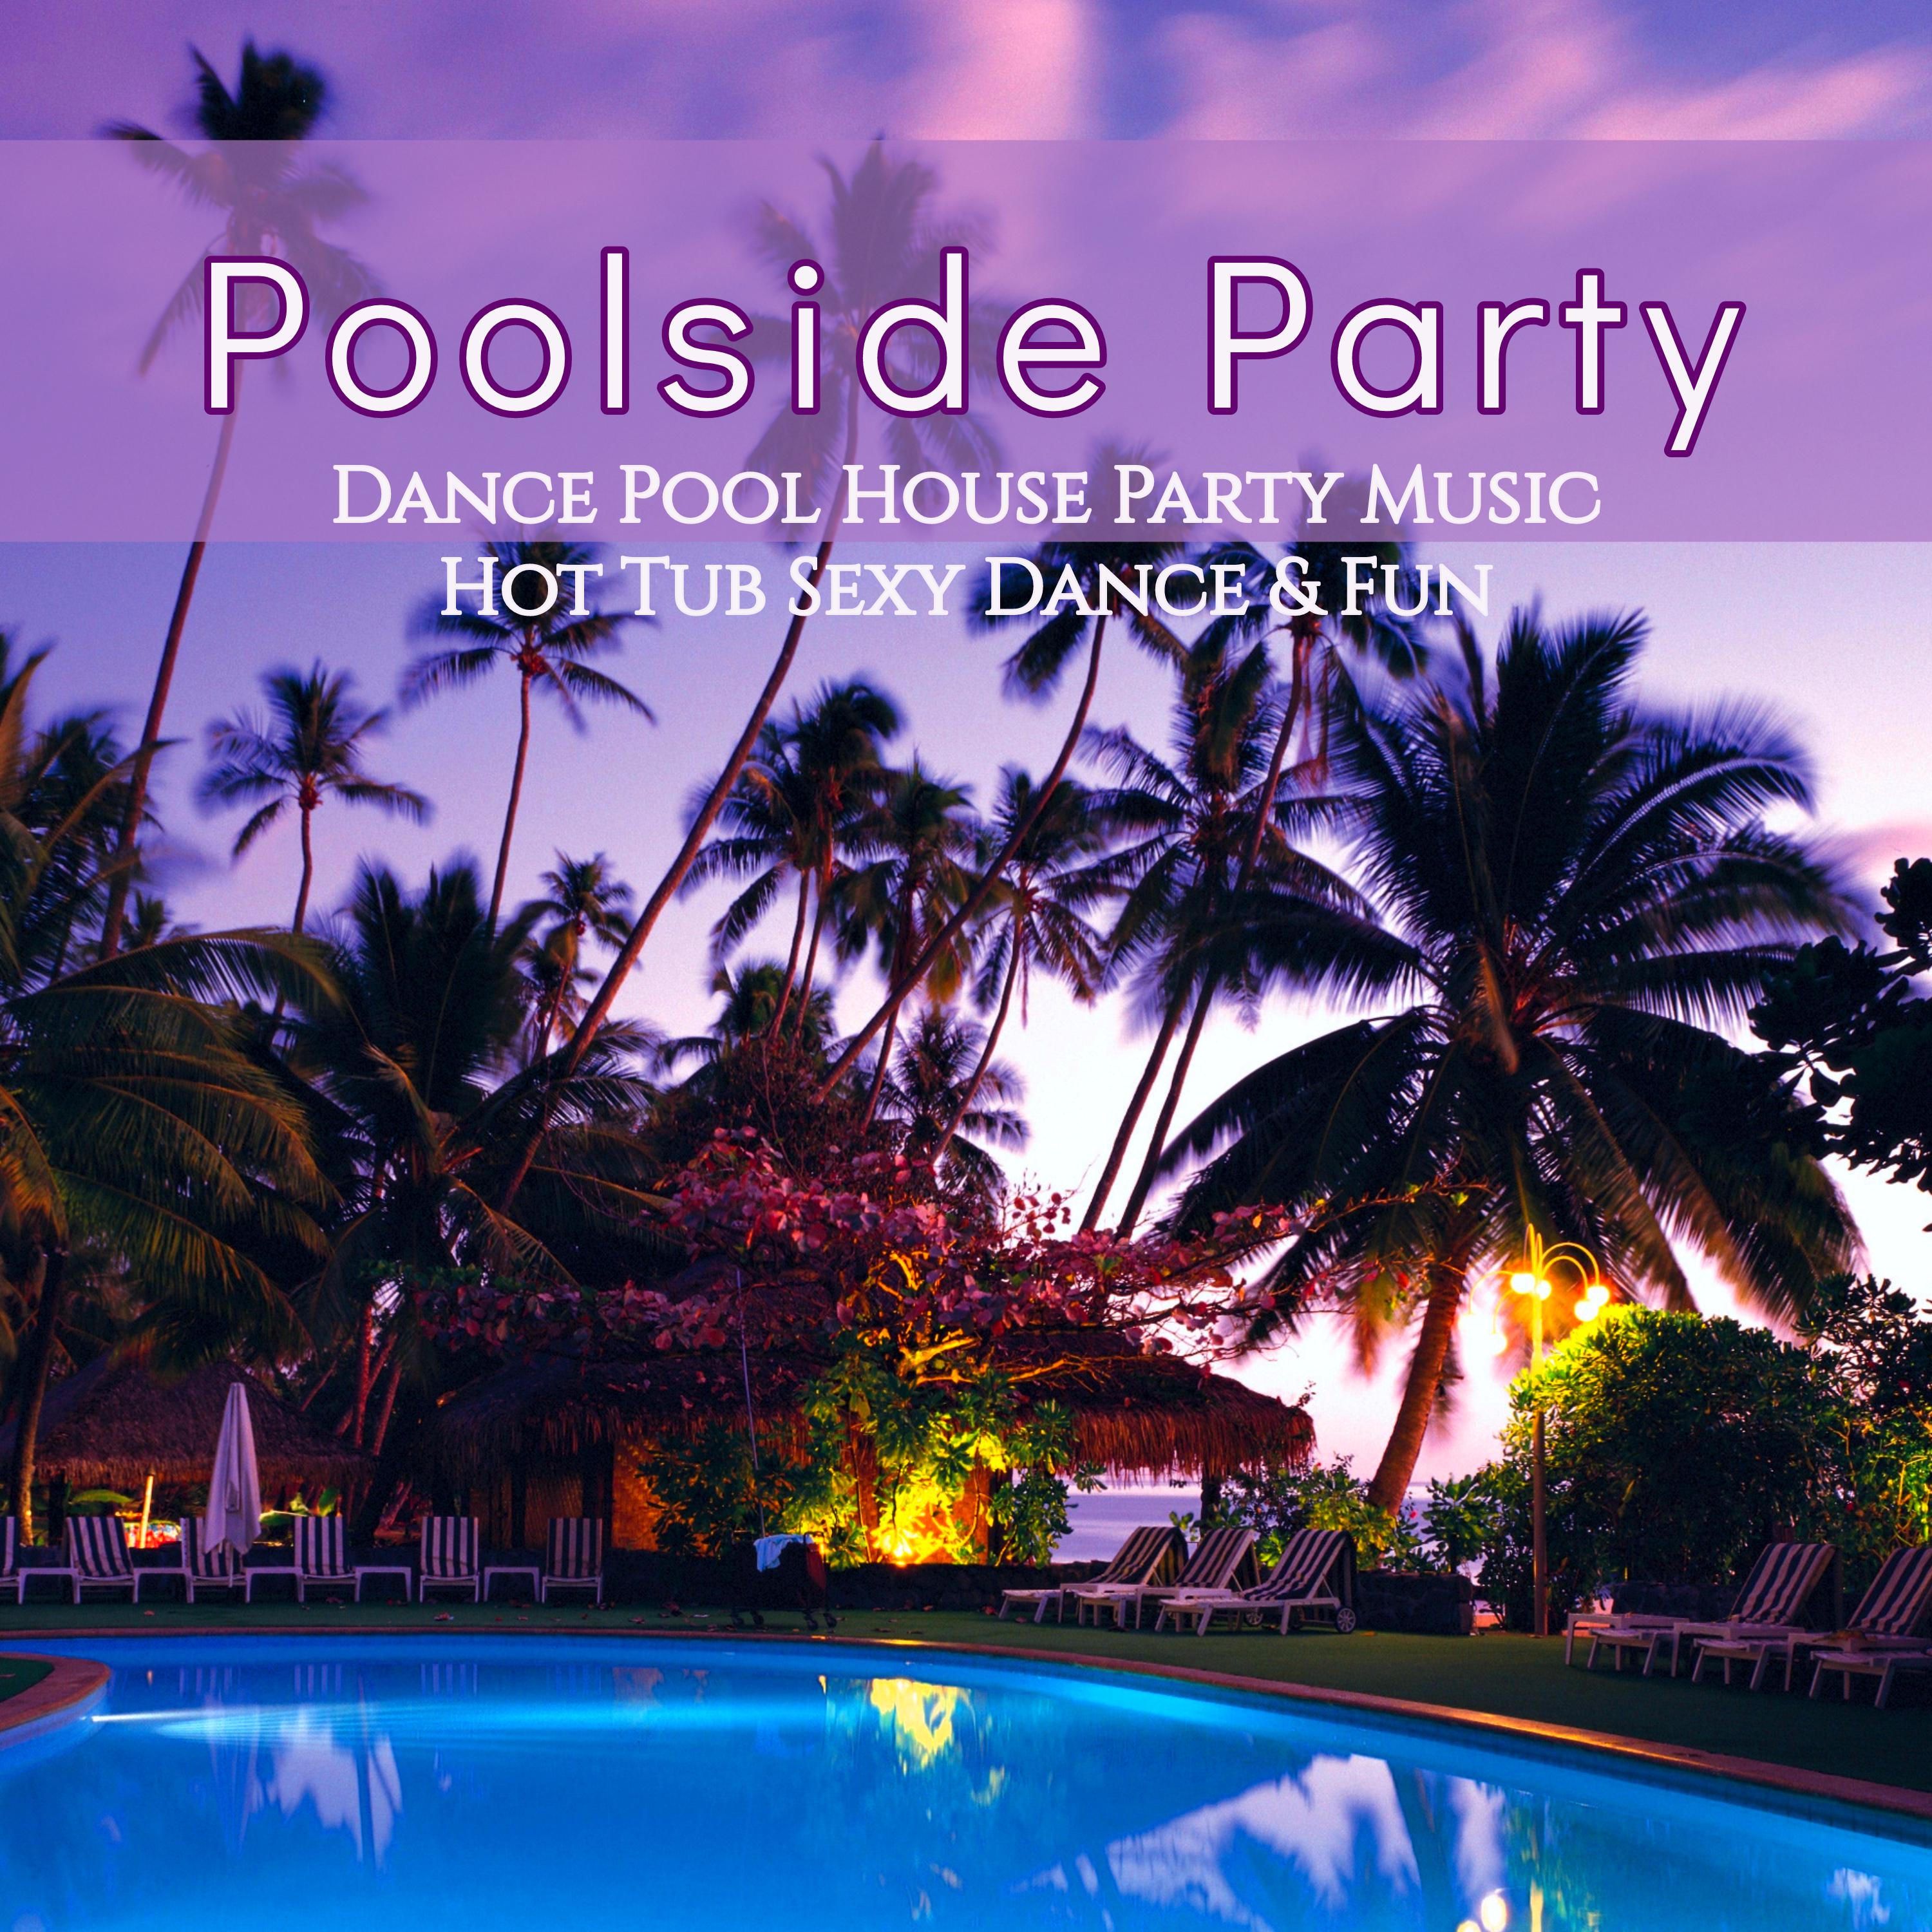 Poolside Party – Dance Pool House Party Music, Hot Tub **** Dance & Fun